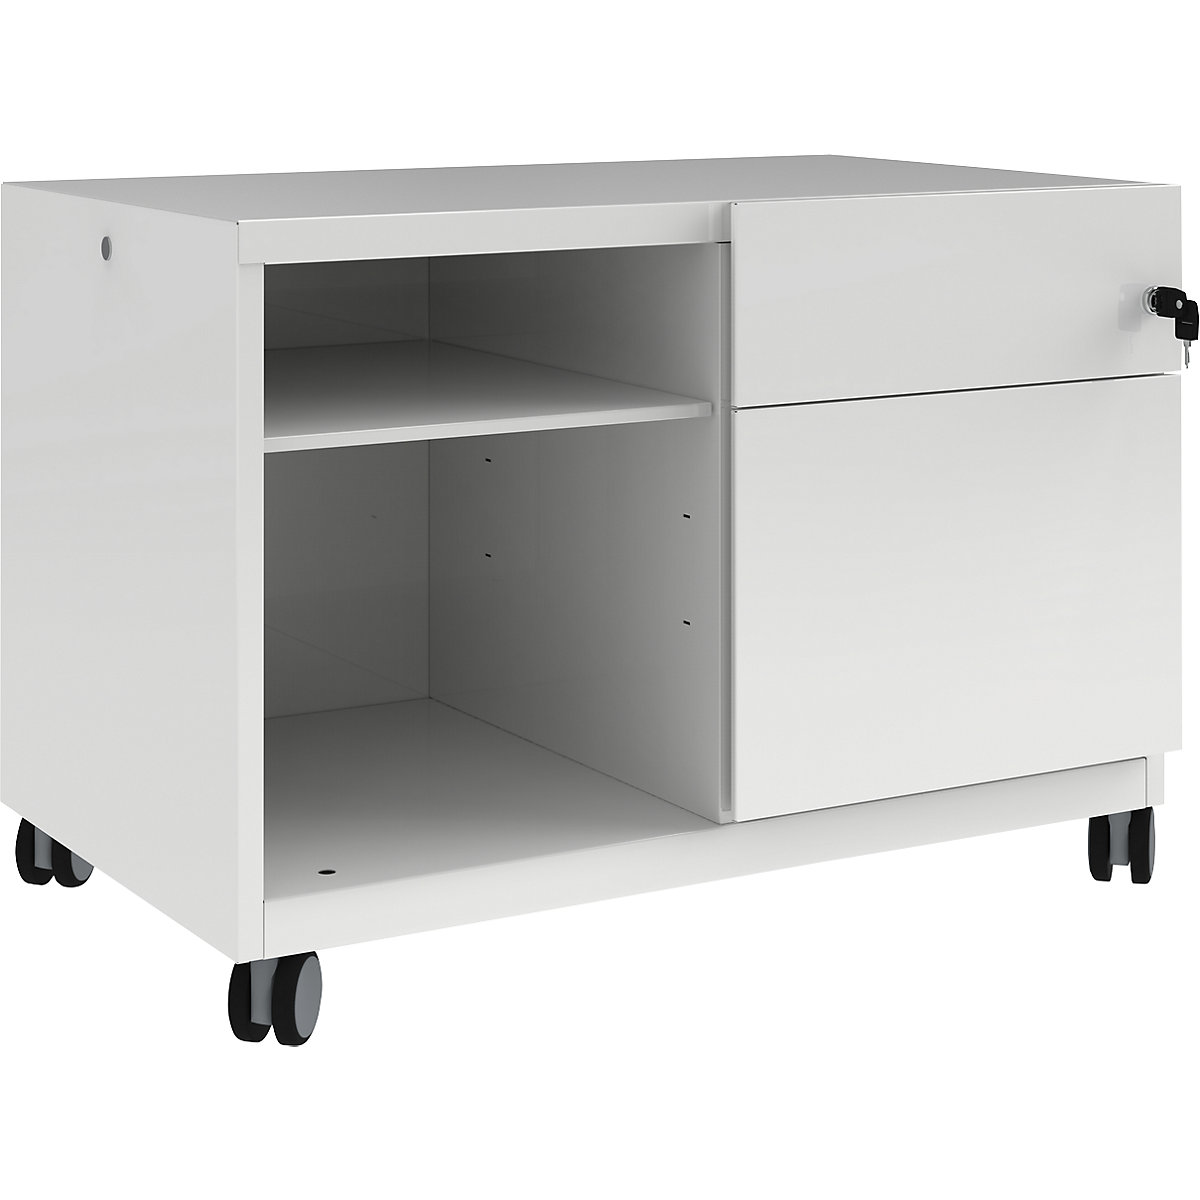 Note™ CADDY, HxBxT 563 x 800 x 490 mm – BISLEY, 1 universal drawer and suspension file drawer on the right, traffic white-17